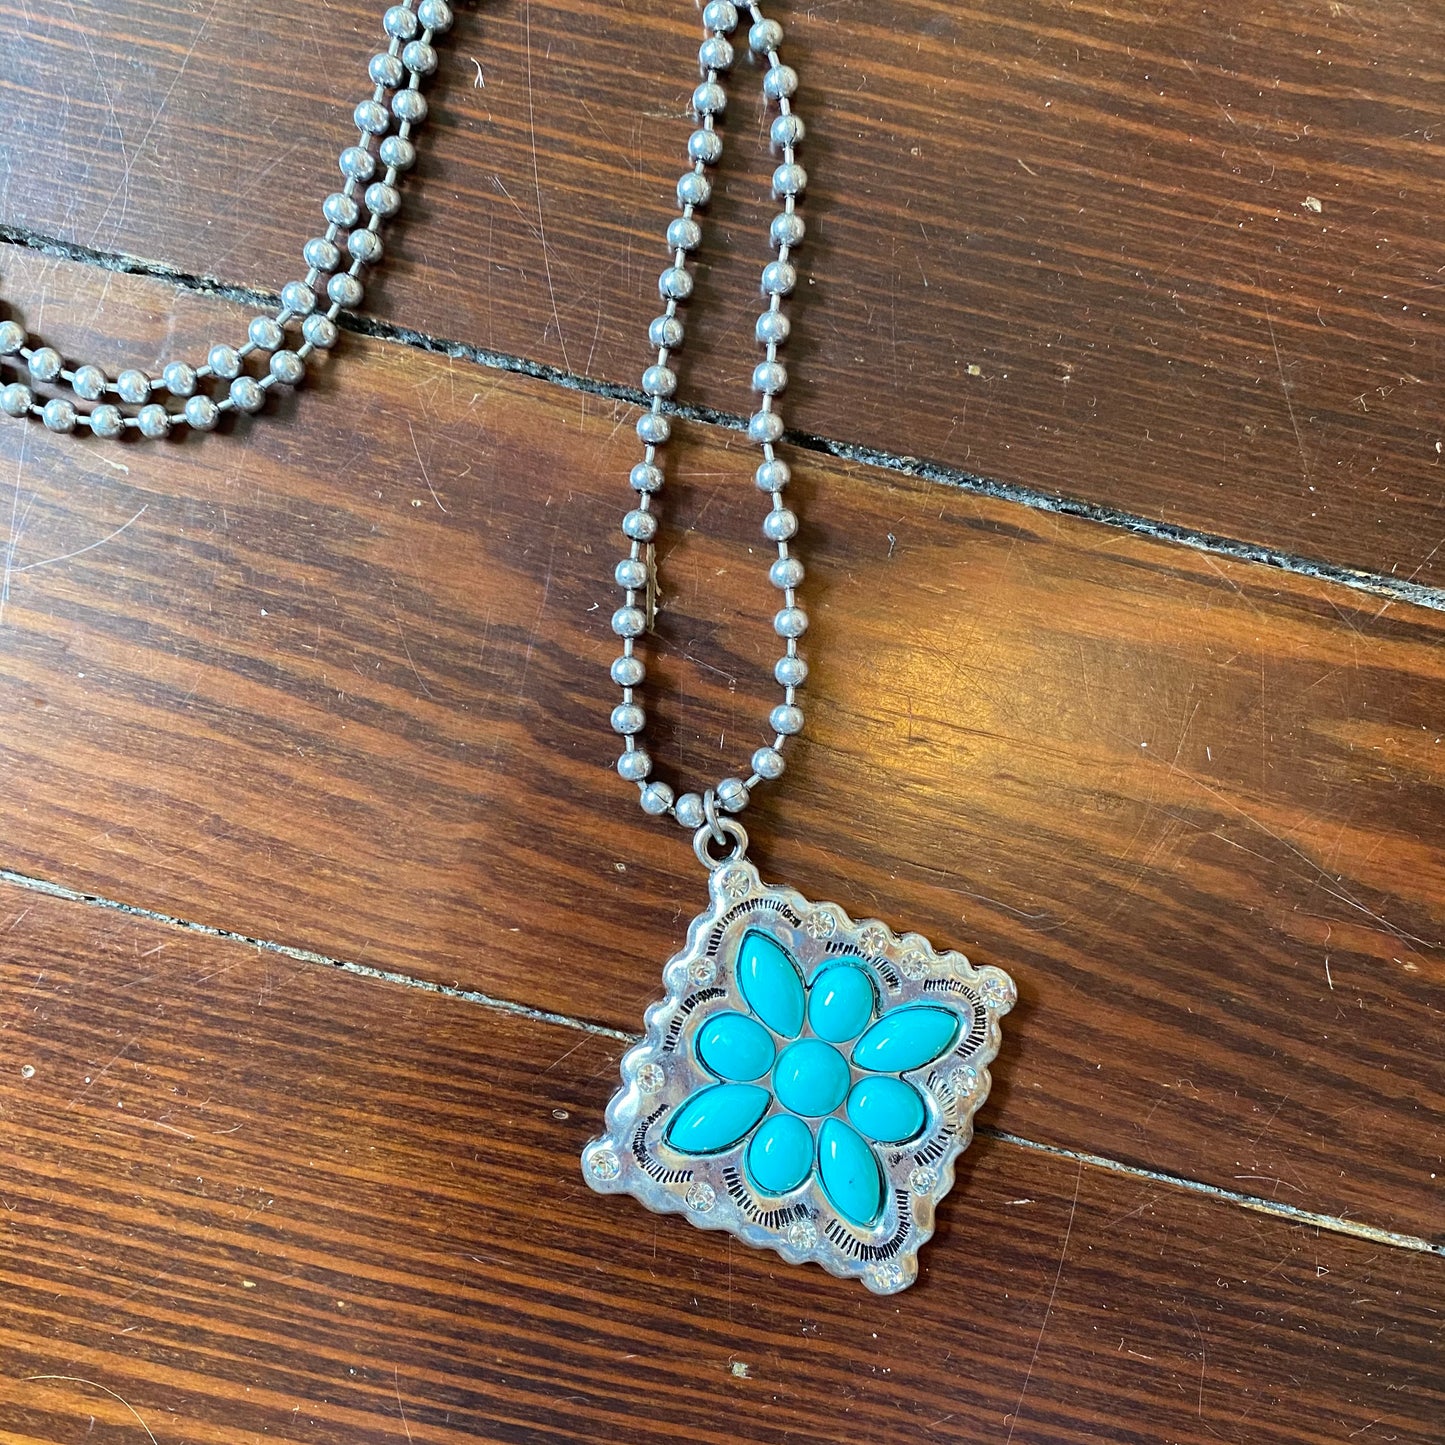 Silver pendant w/ turquoise necklace